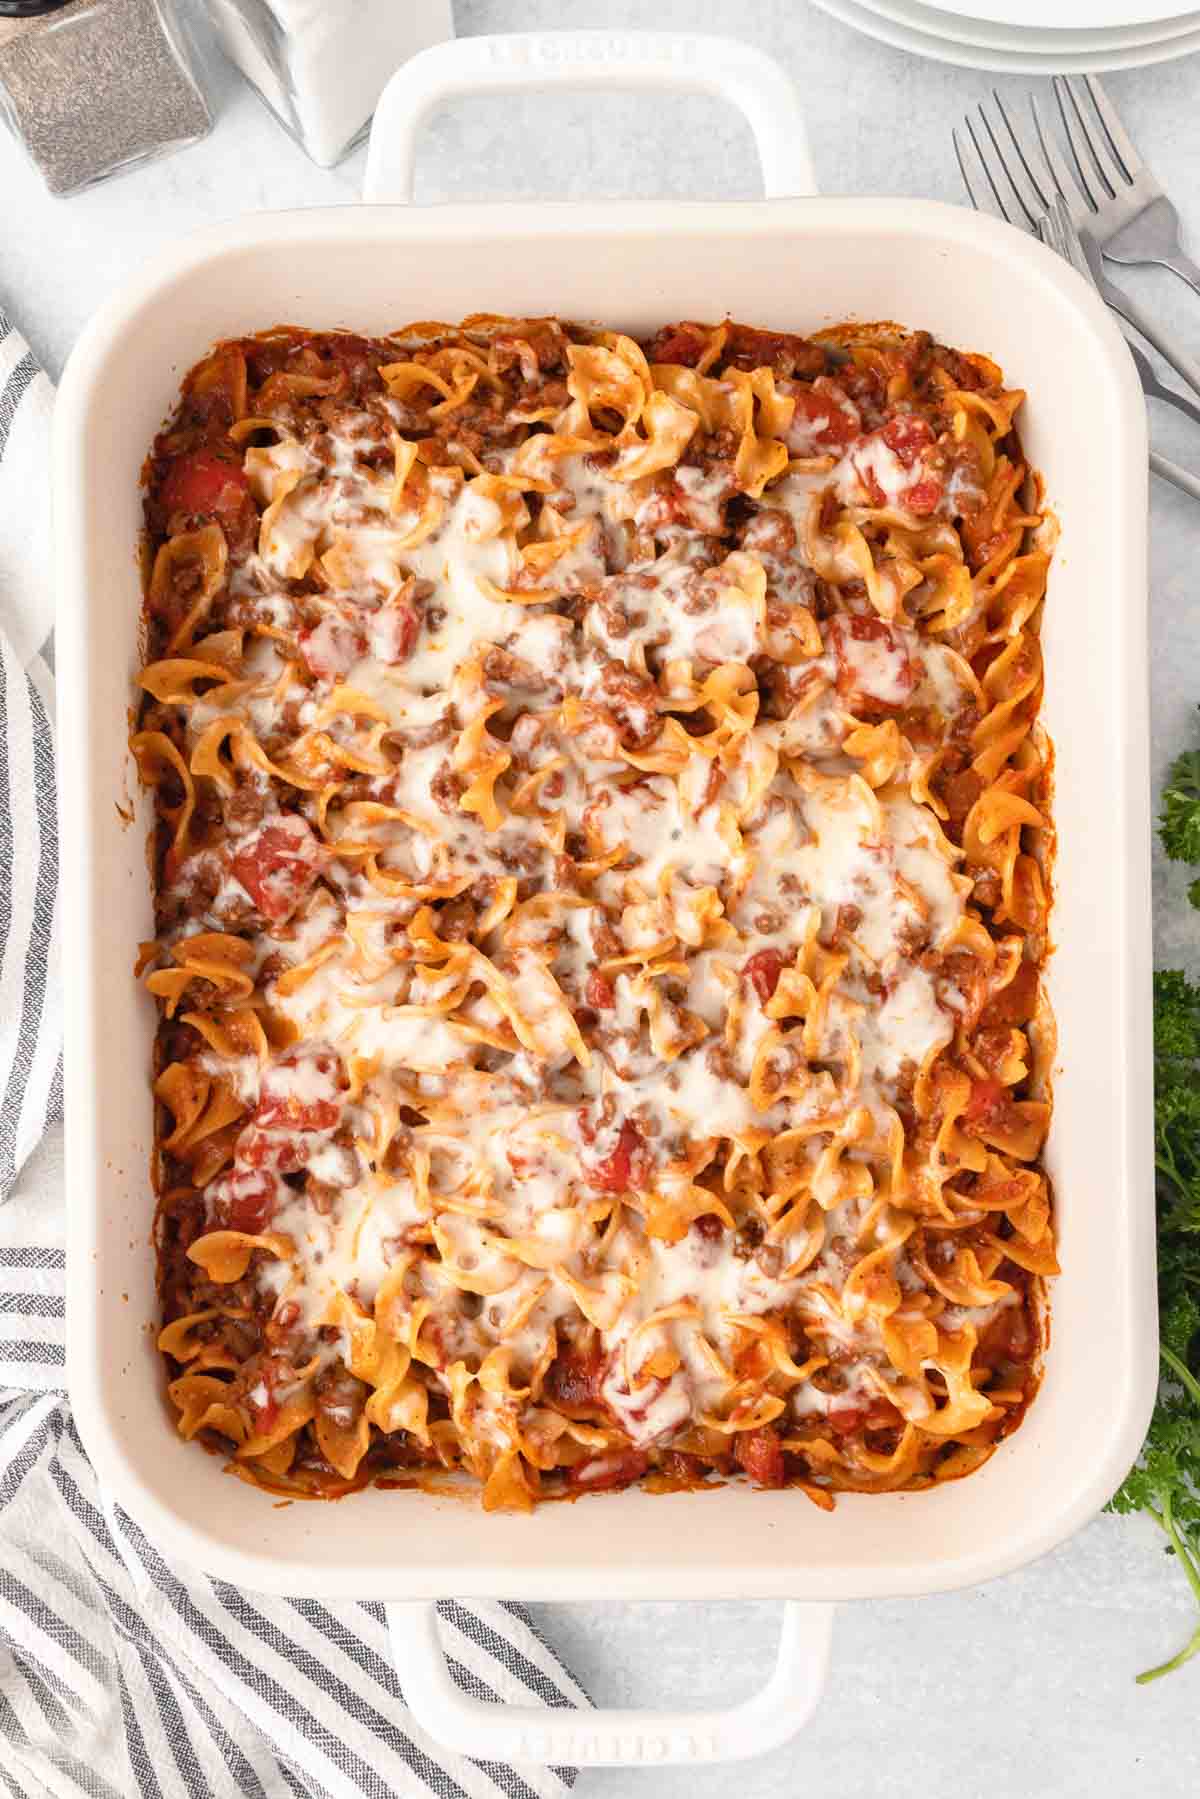 Baked mround beef noodle casserole with a layer of melted mozzarella on top.